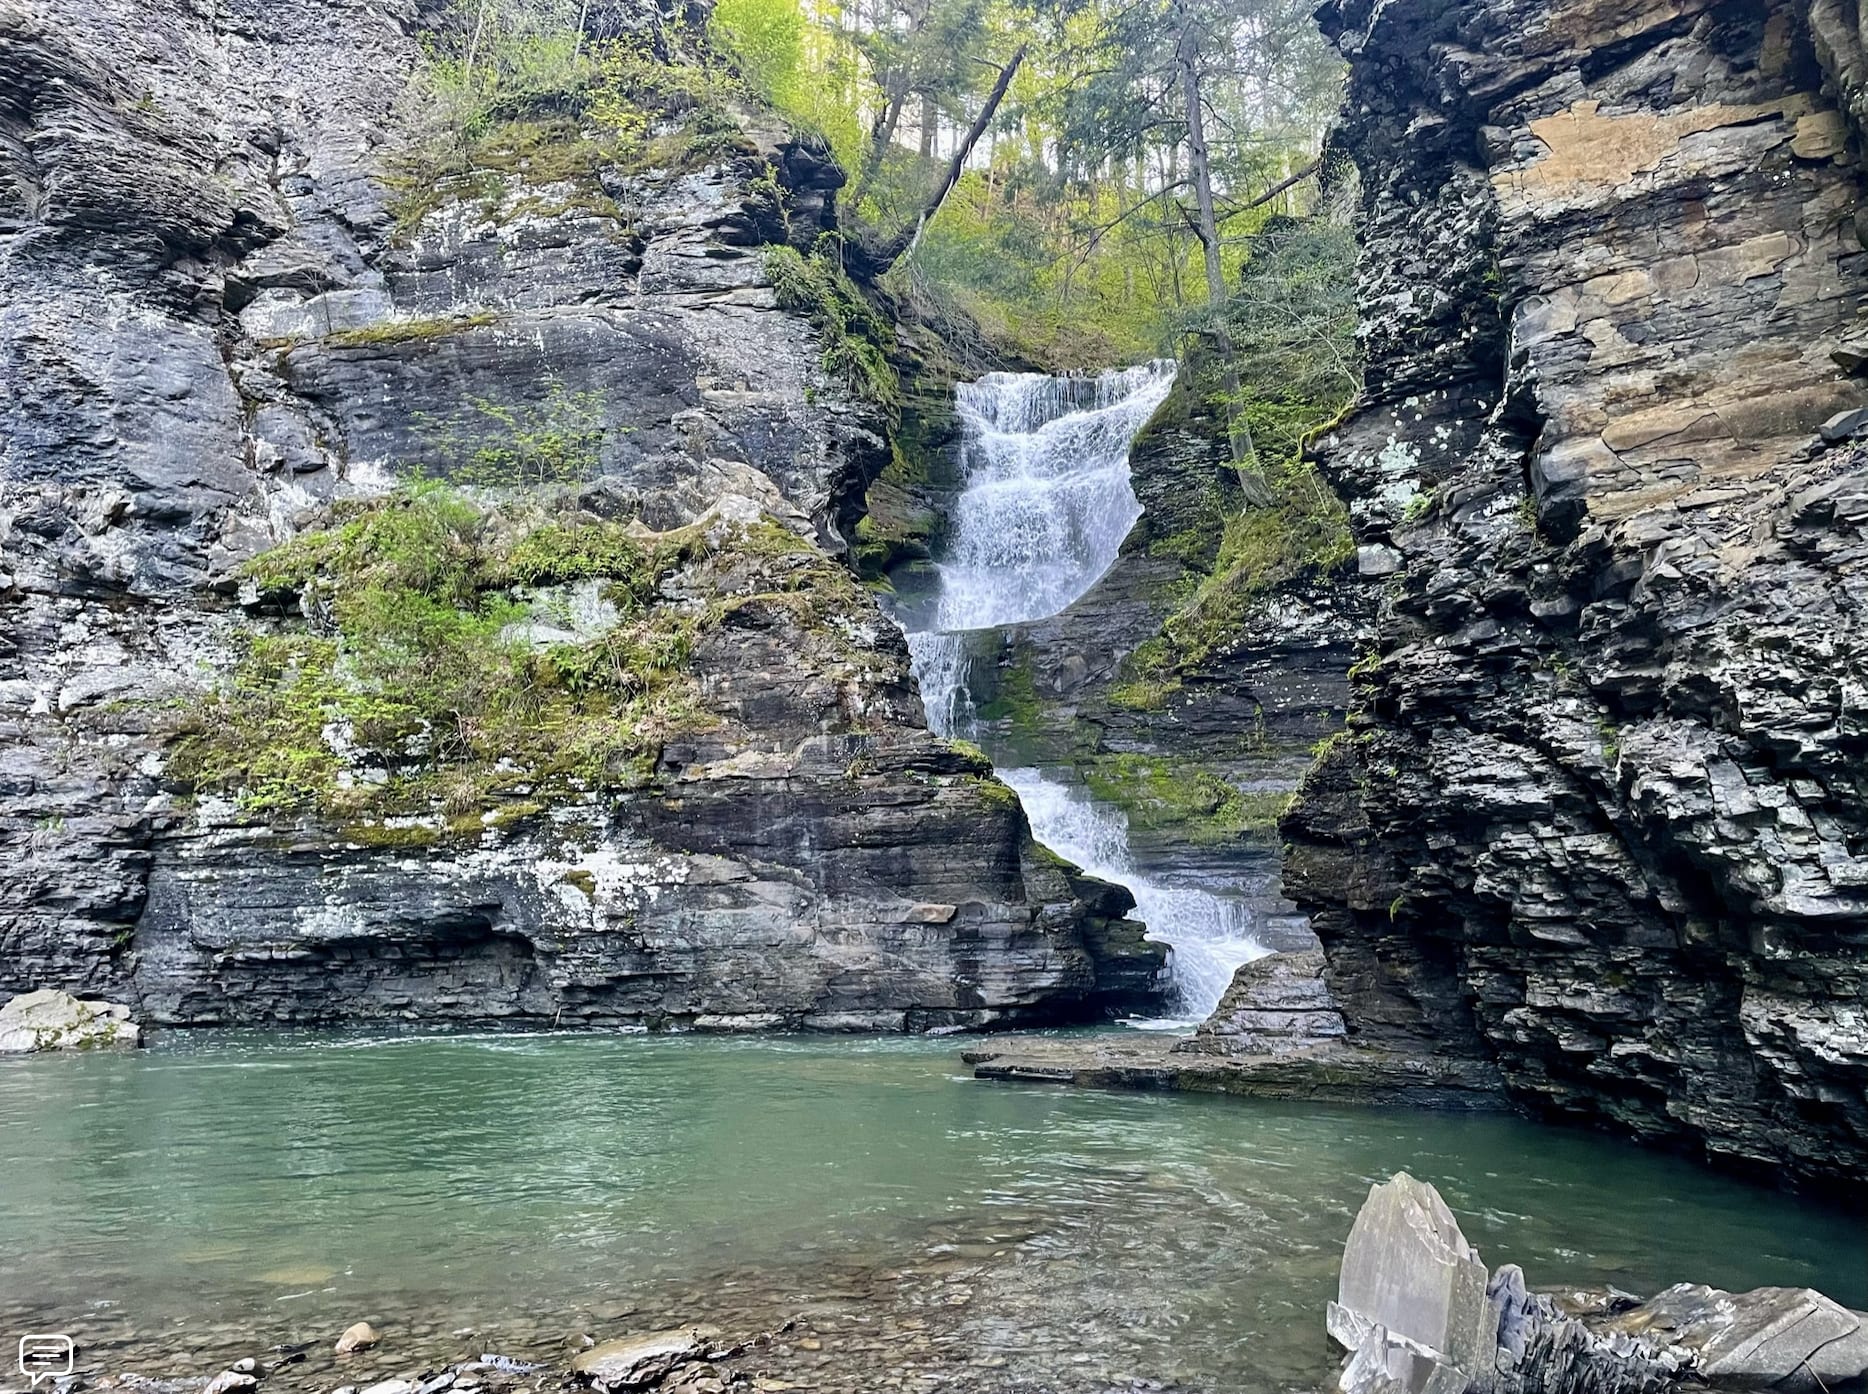 the waterfall. The eye of water at the base of the falls is about 7' deep.  The big pool is 3-5 feet deep. There are other swimming holes along the river as well as native clay beds for purification masks or making little figures you can bake in the campfire.